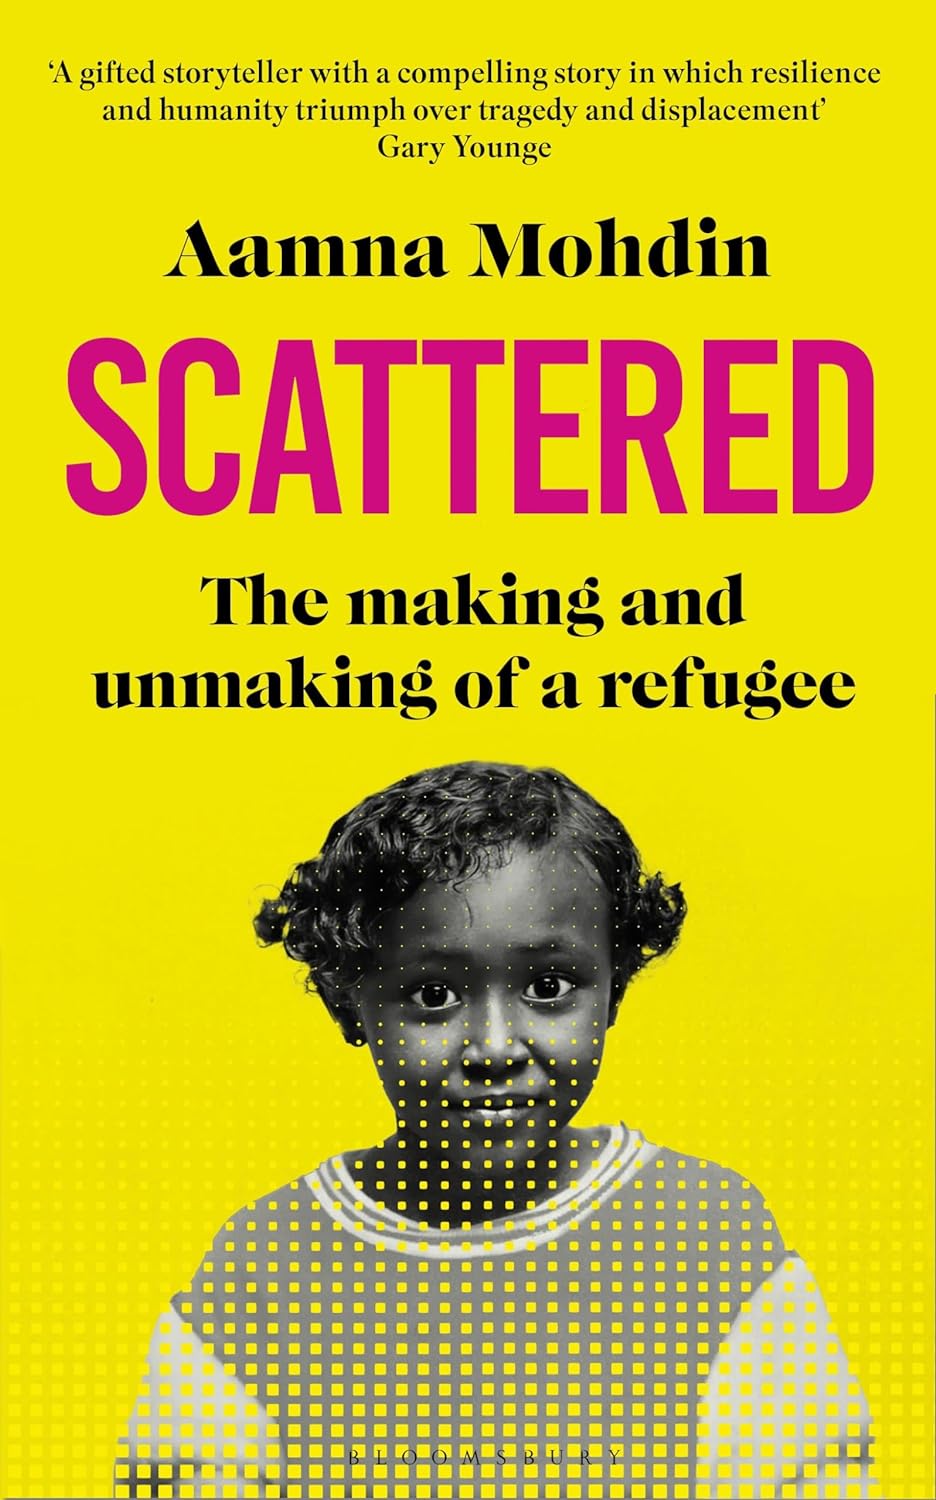 Scattered - The Making and Unmaking of a Refugee